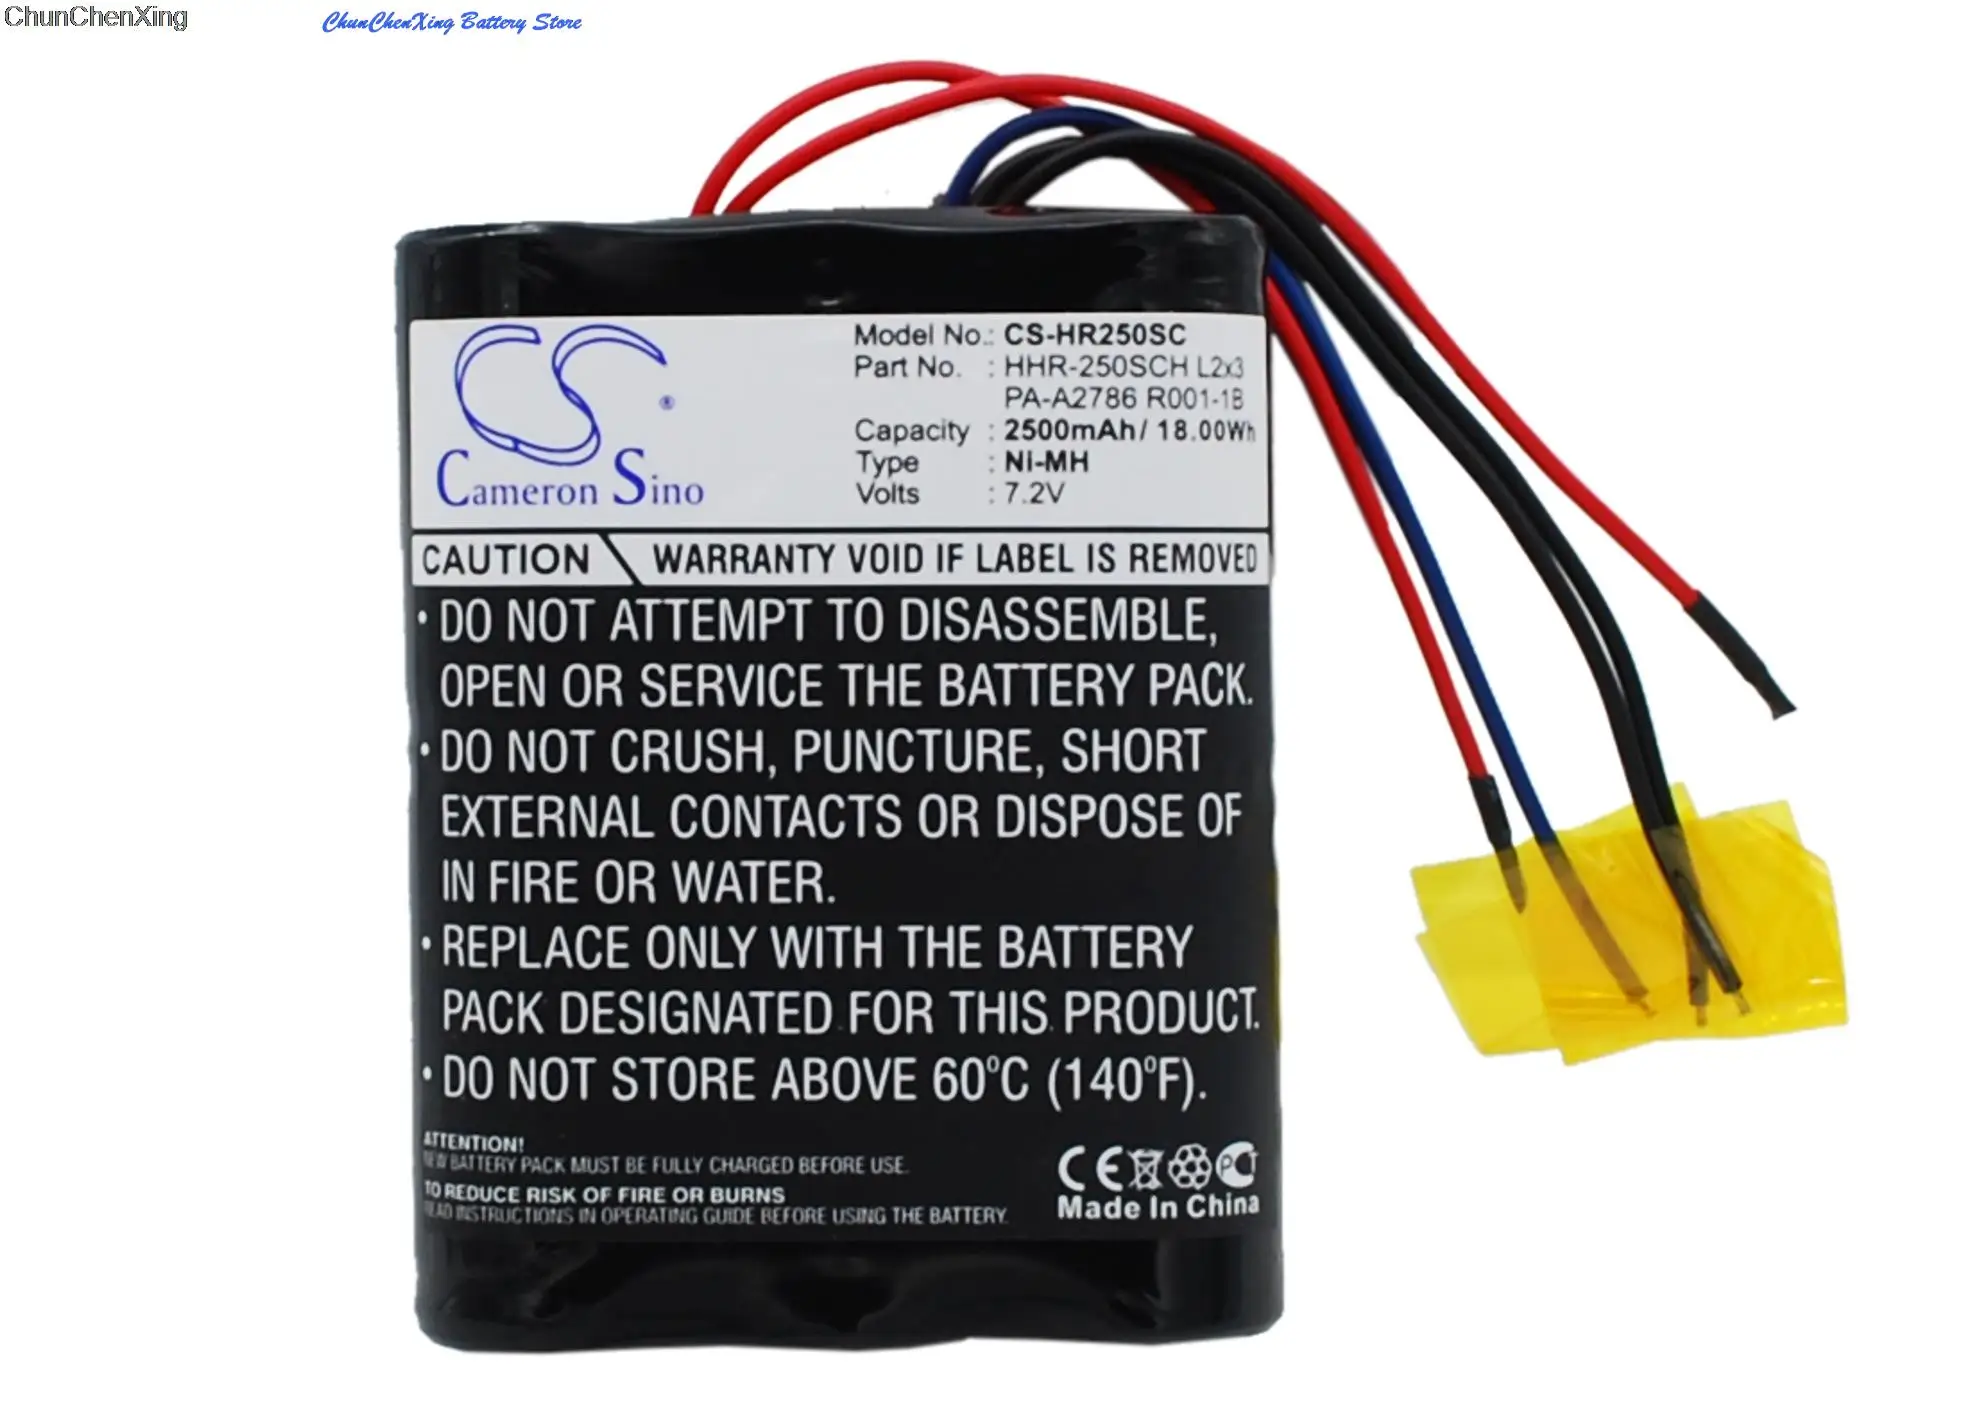 

Cameron Sino 2500mAh Battery for Panasonic HHR-250SCH L2x3, PA-A2786 R001-1B ( Without connector )